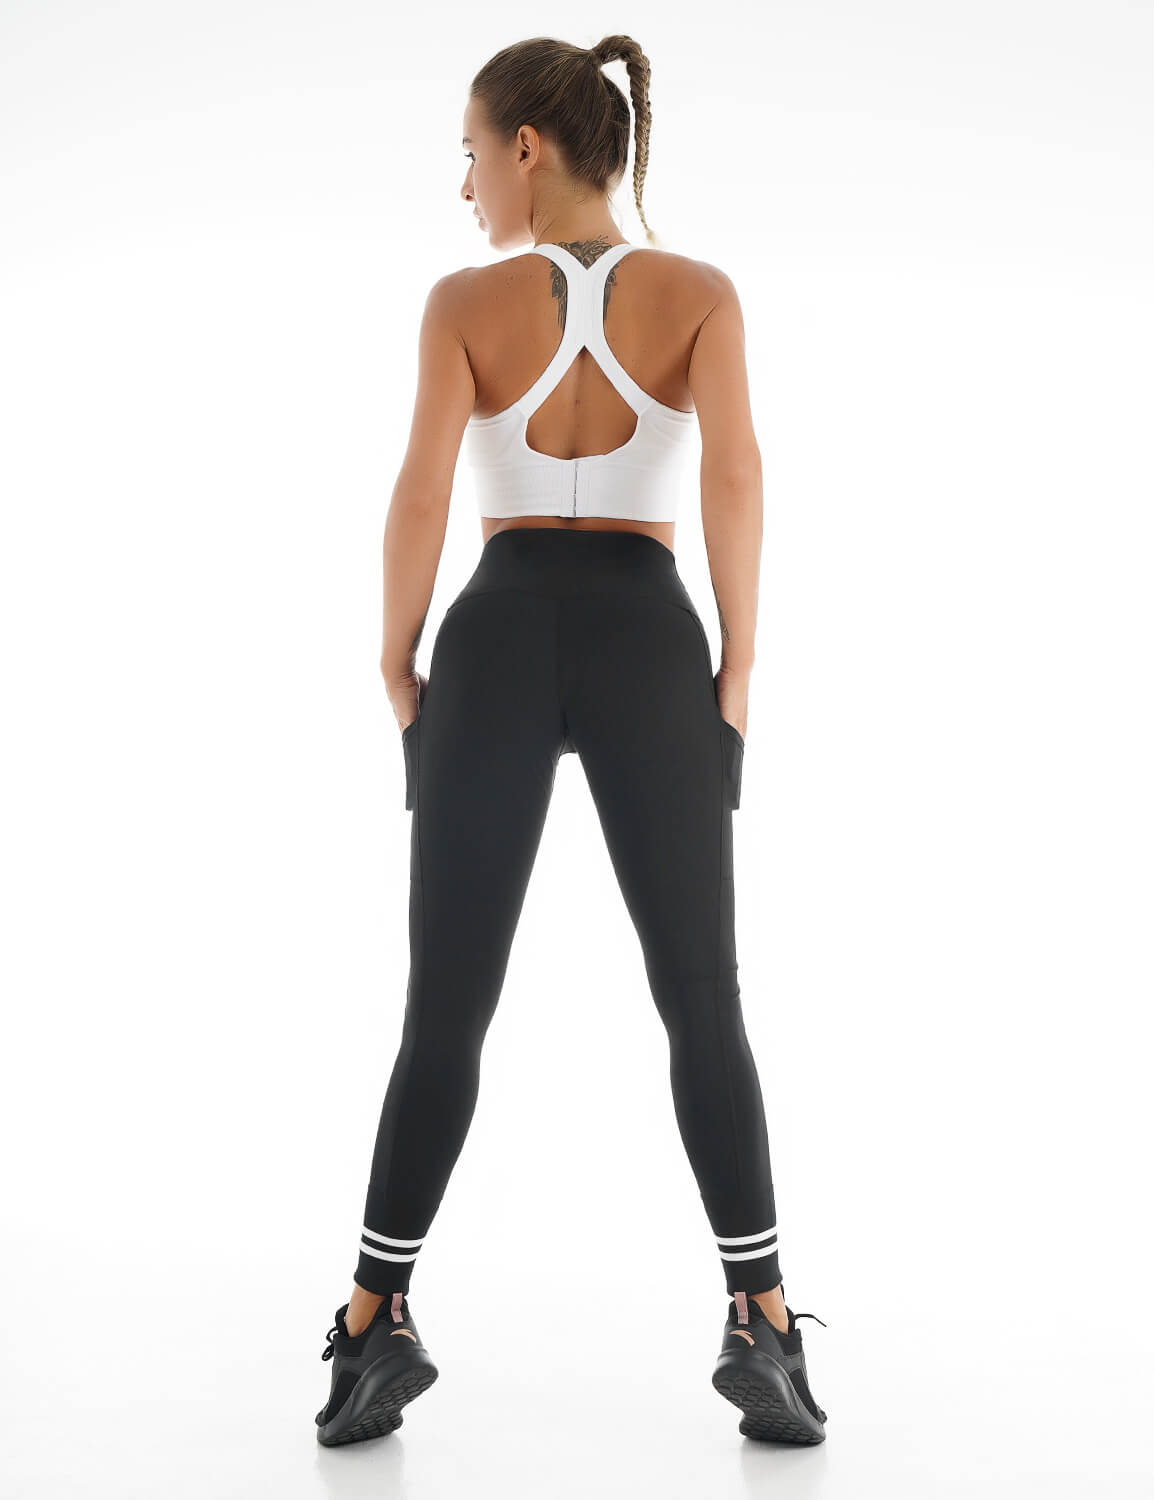 Blooming Jelly_Workout Training Fitness Leggings_Black_257210_02_Women Athletic Comfy Outfits_Bottoms_Leggings